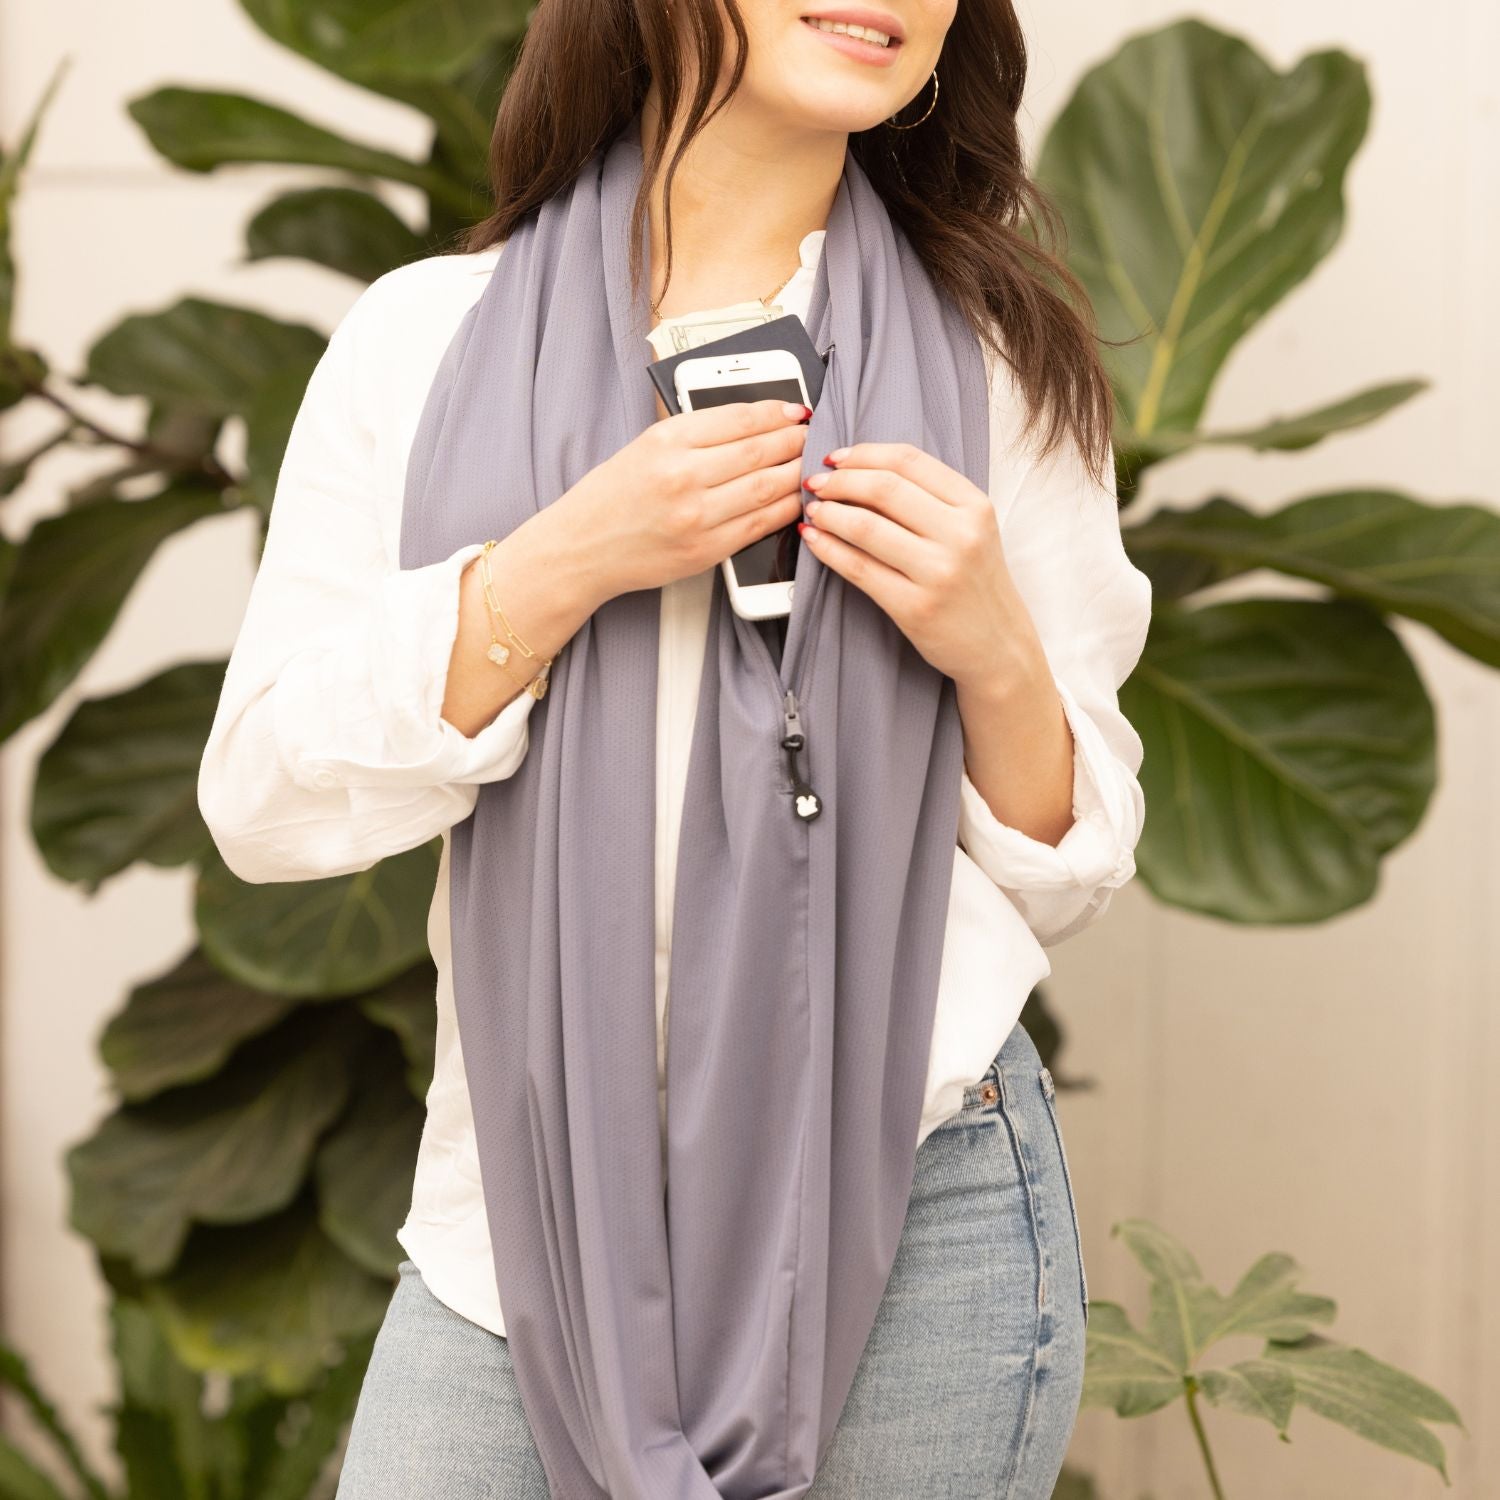 SHOLDIT Convertible Infinity Scarf with Pocket Grey with items in pocket shown long